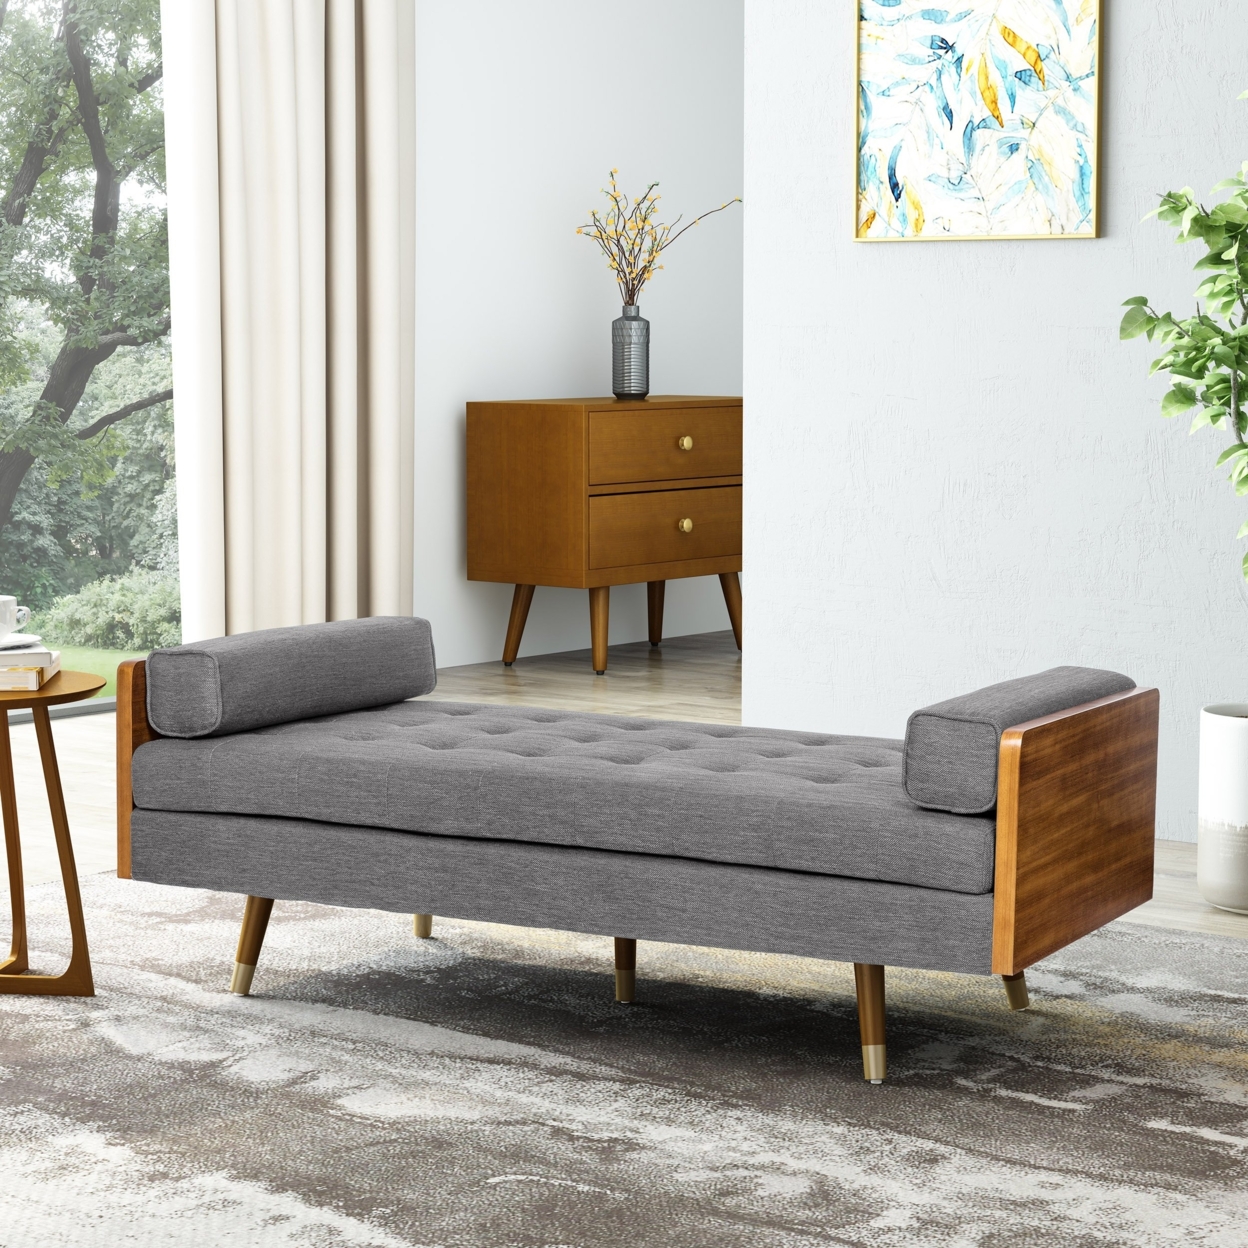 Tiltonsville Mid-Century Modern Tufted Double End Chaise Lounge With Bolster Pillows - Dark Walnut With Golden/grey